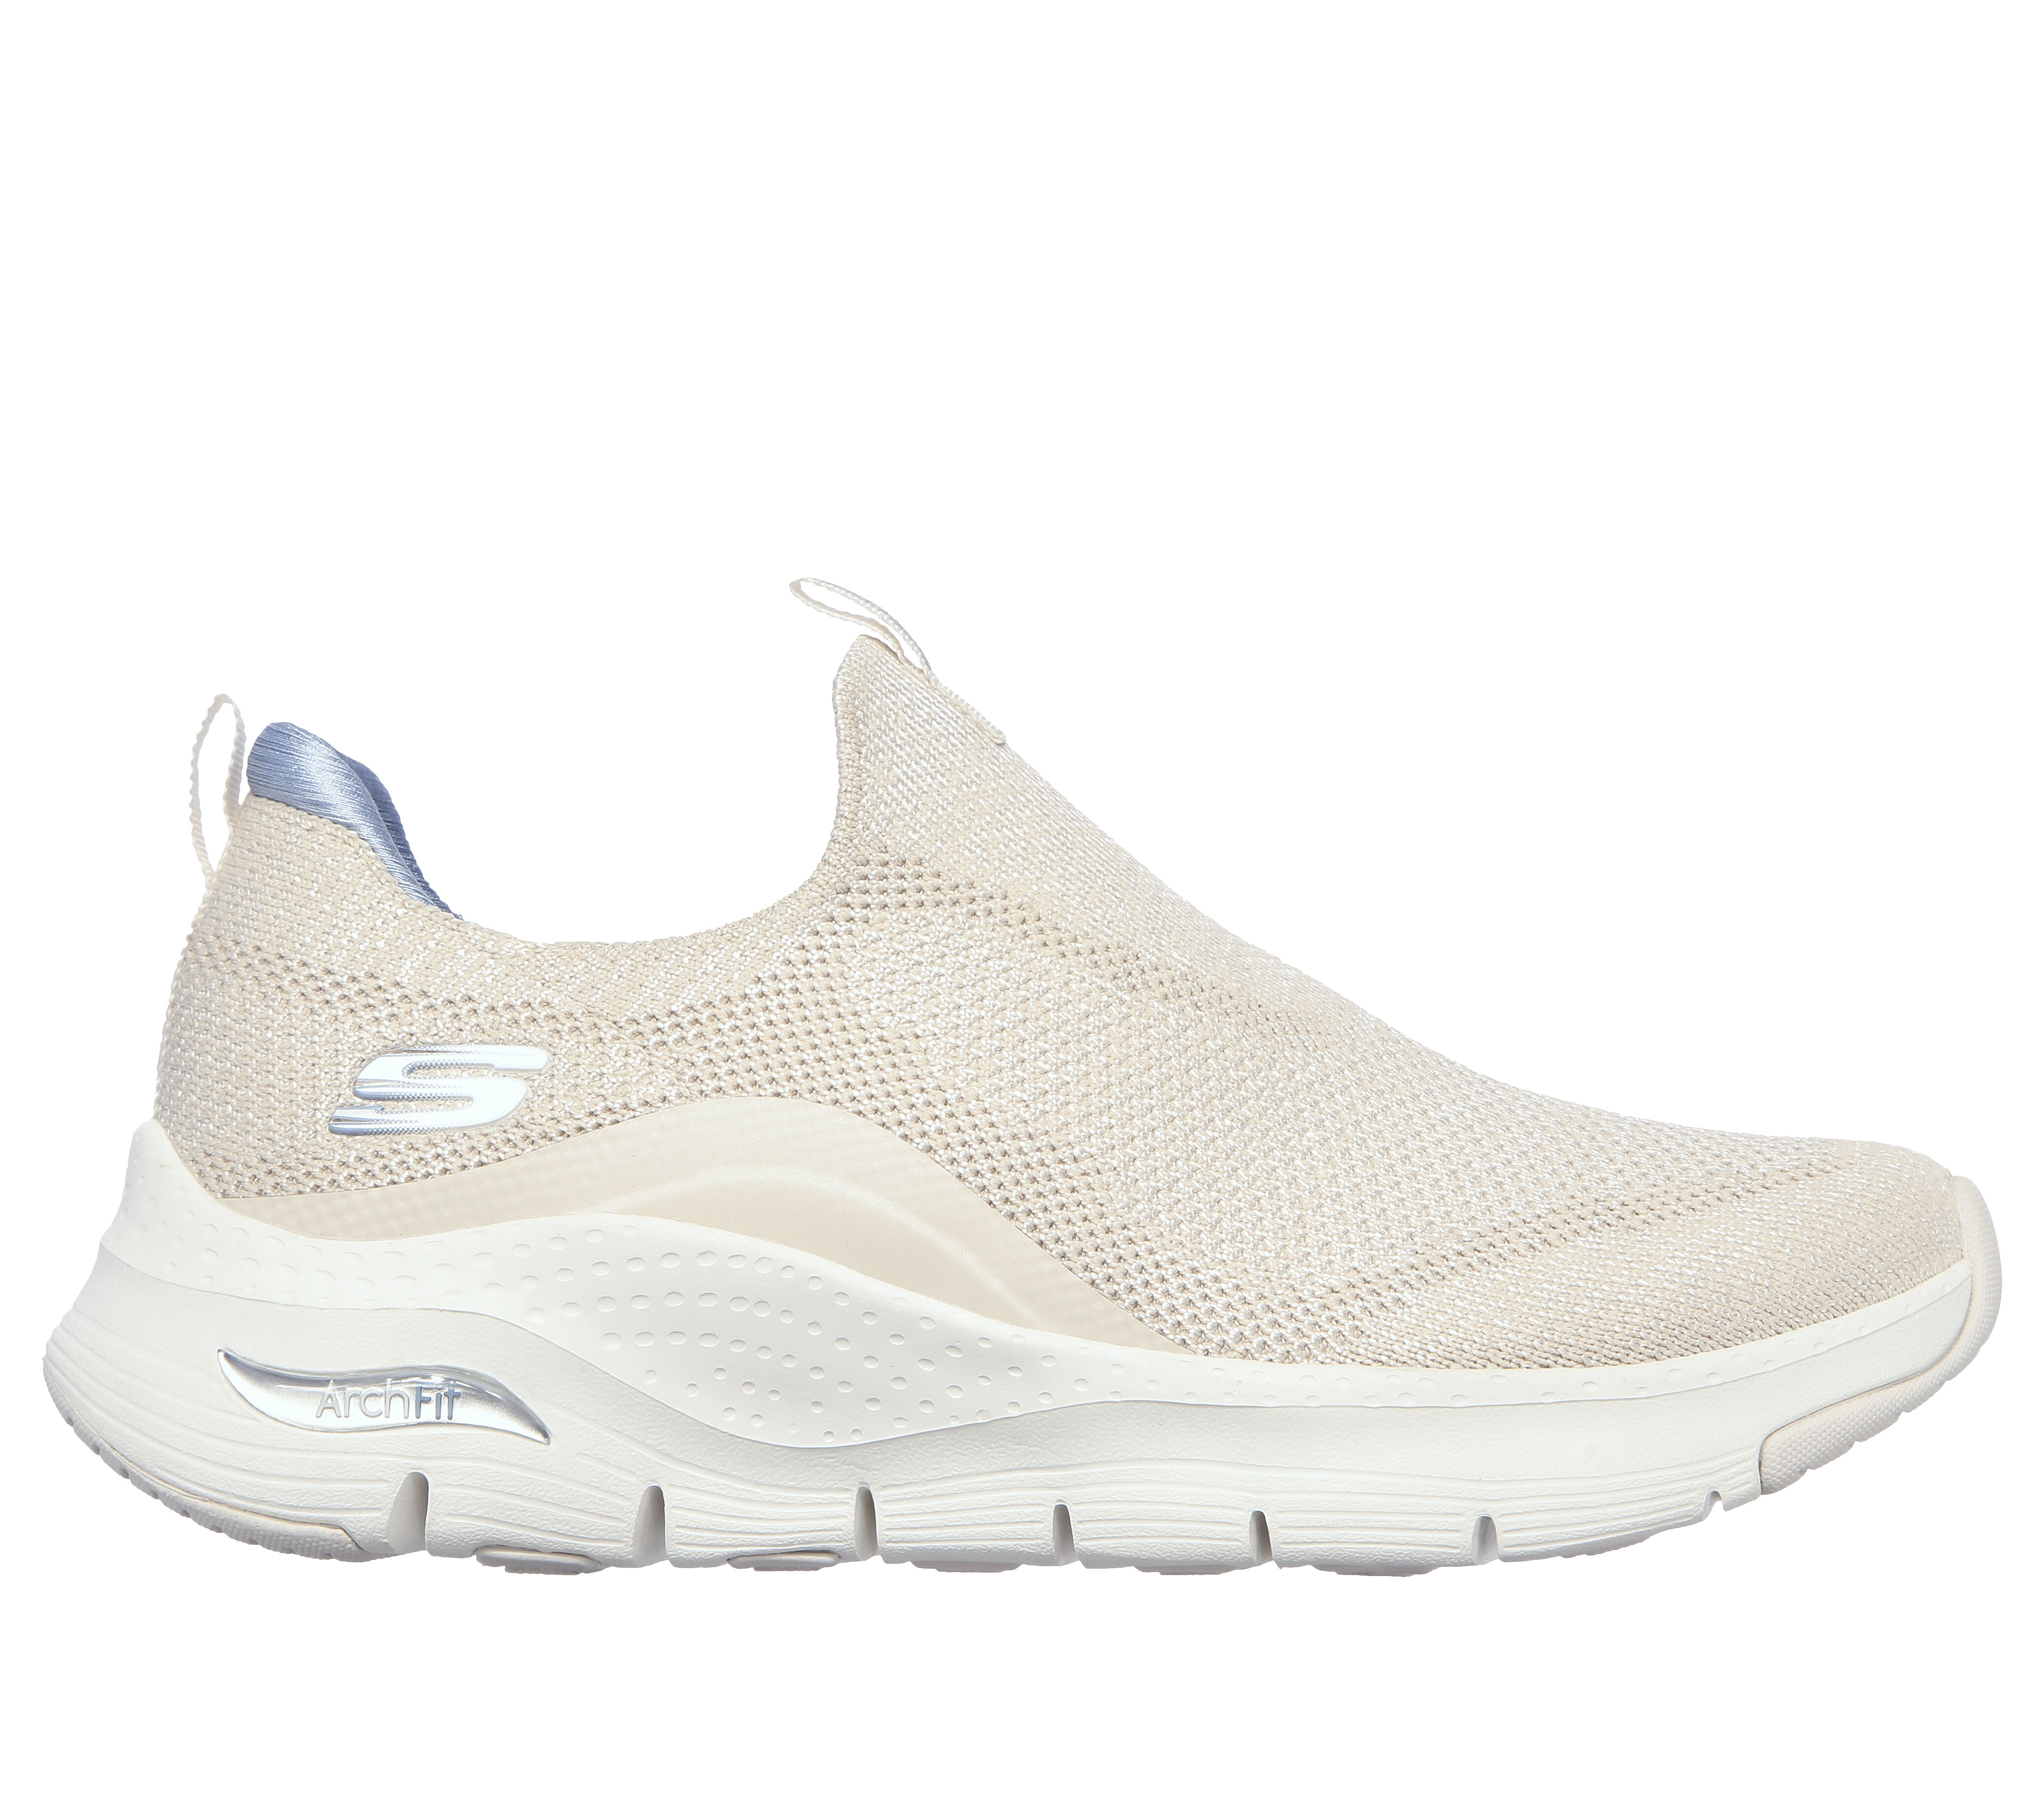 skechers wide fit shoes 2019